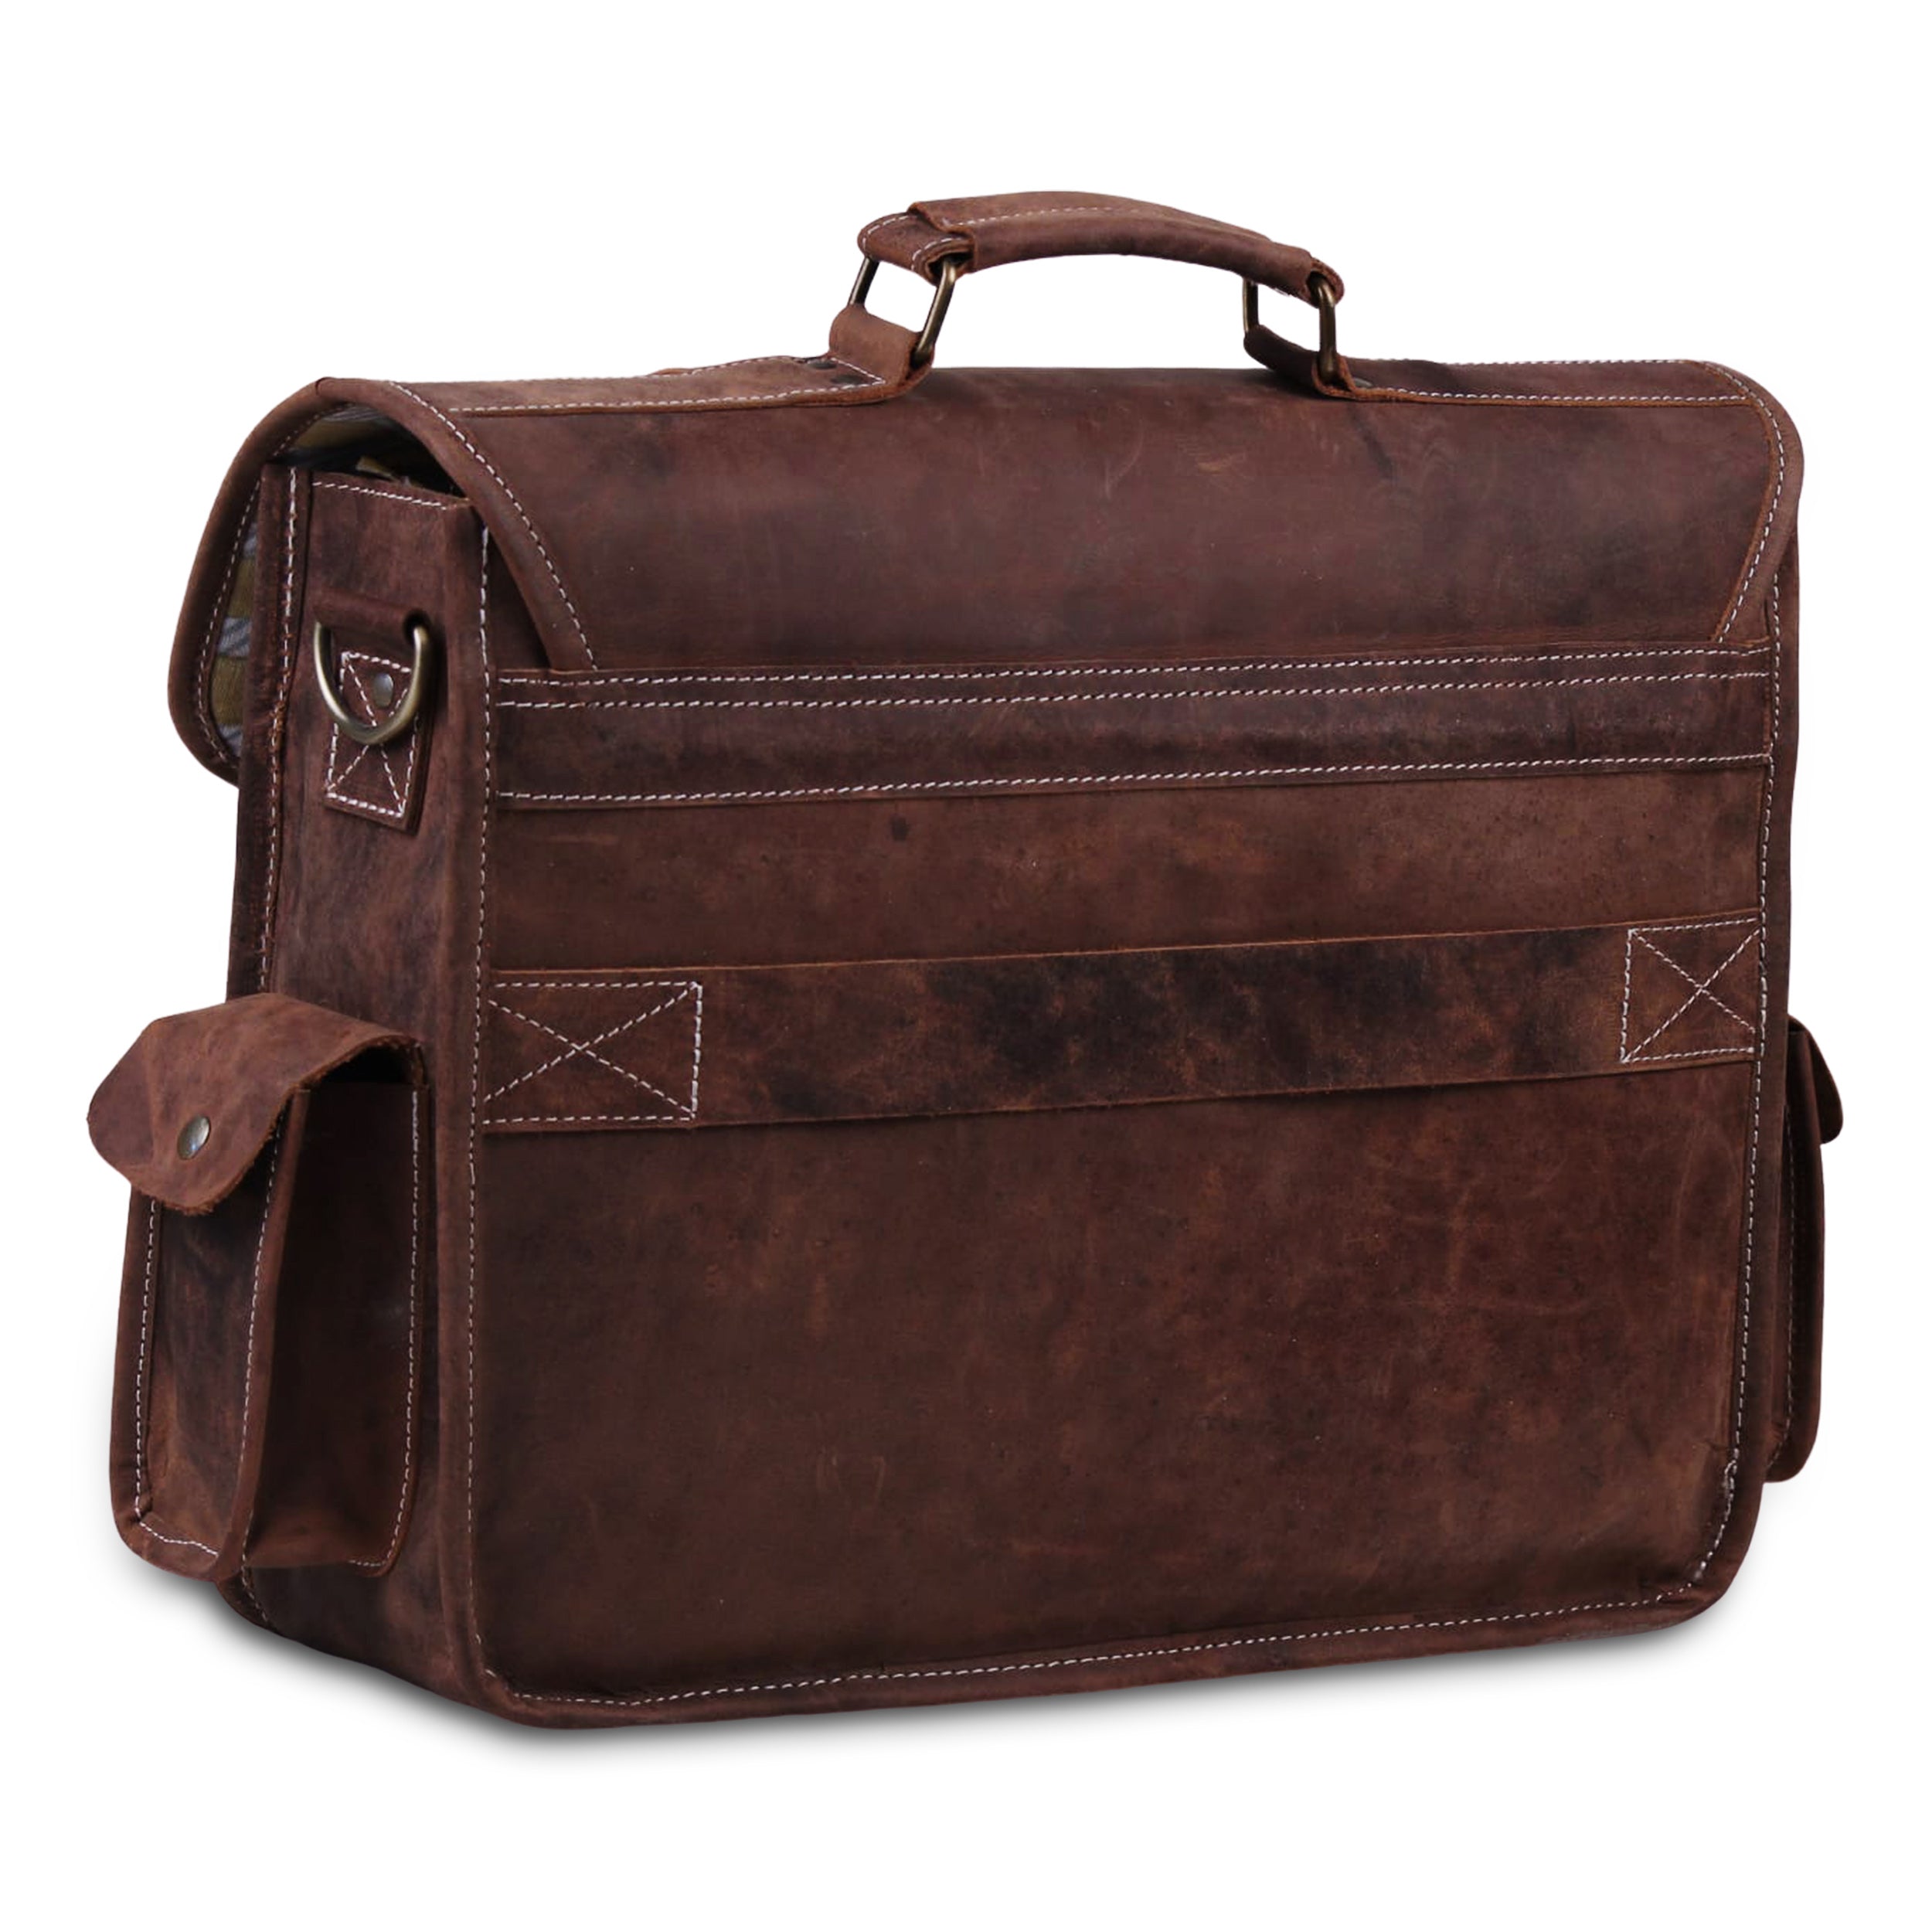 Genuine Full Grain Brown Leather 16 inch Large Briefcase Laptop bag by Hulsh